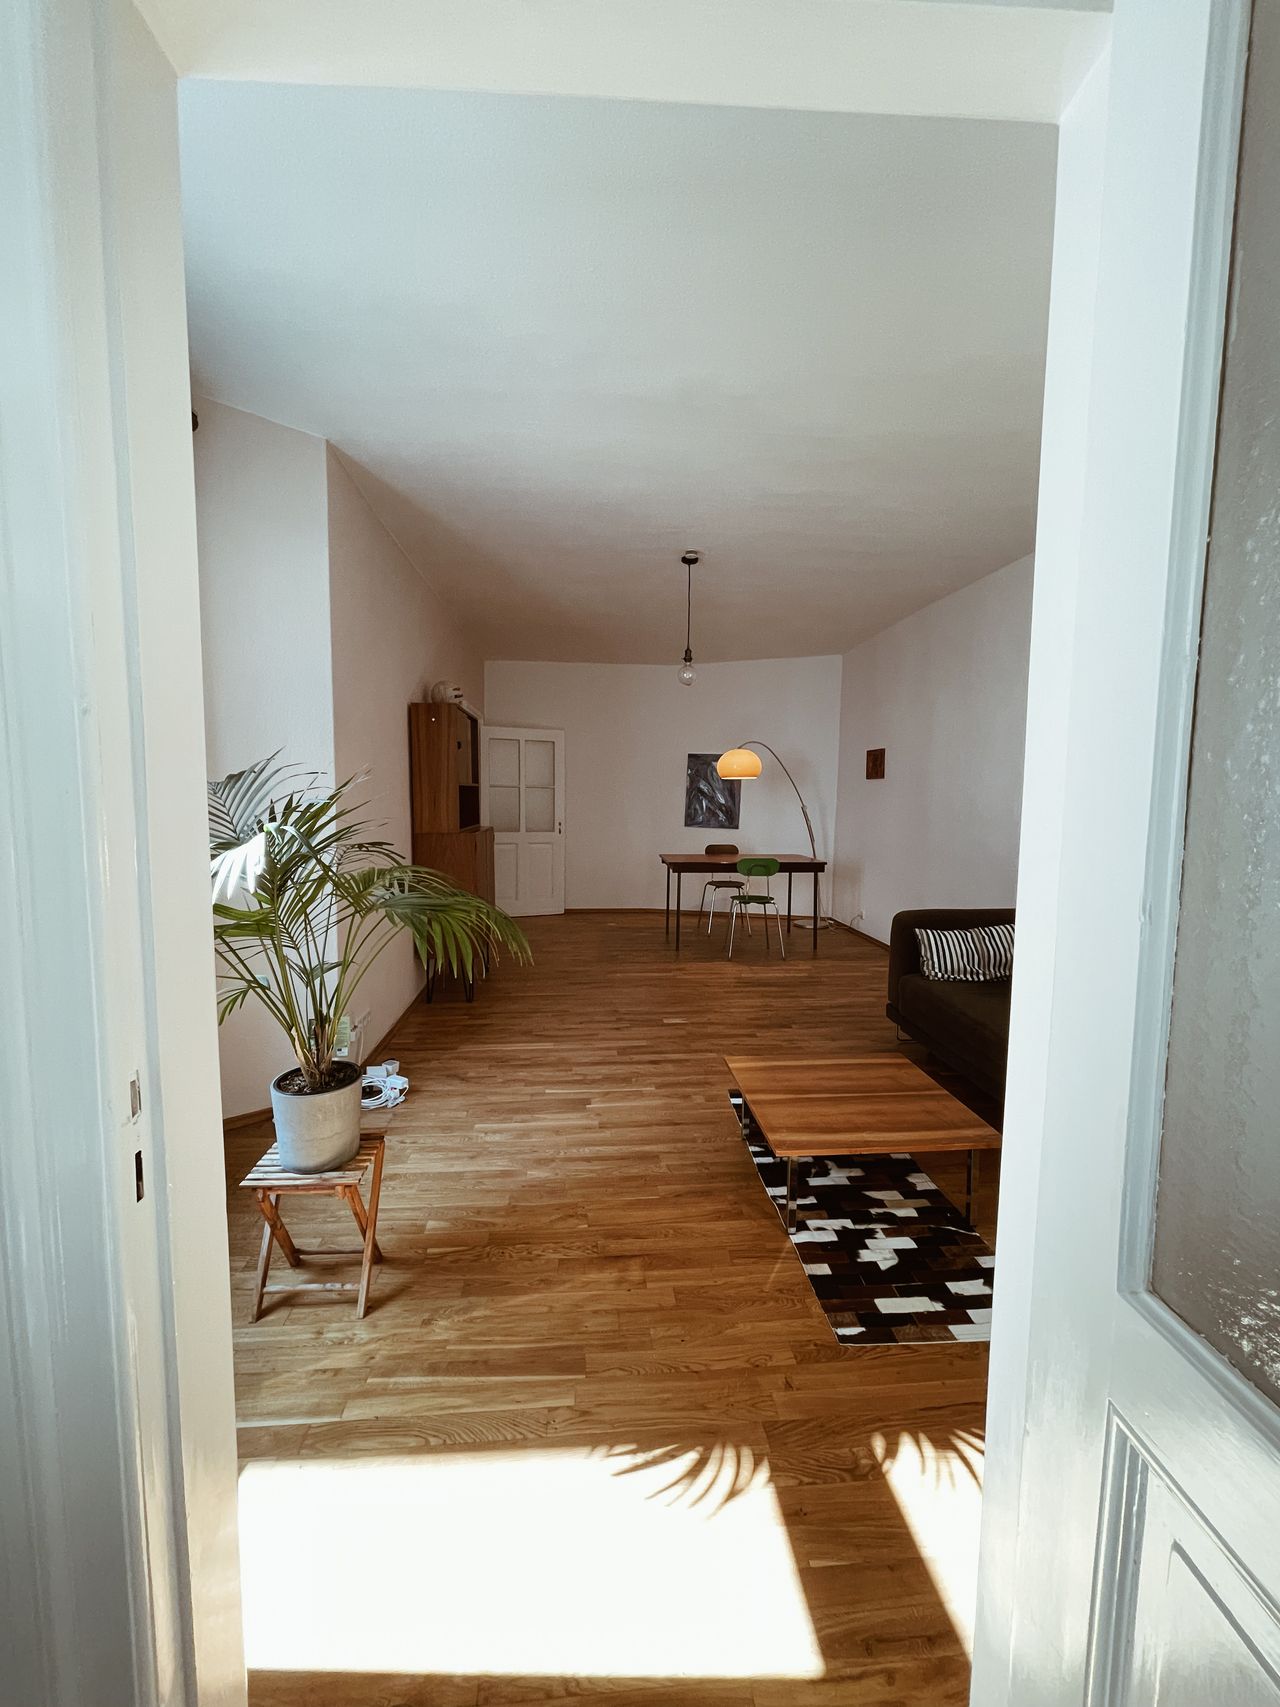 Lovely flat conveniently located in Berlin Mitte